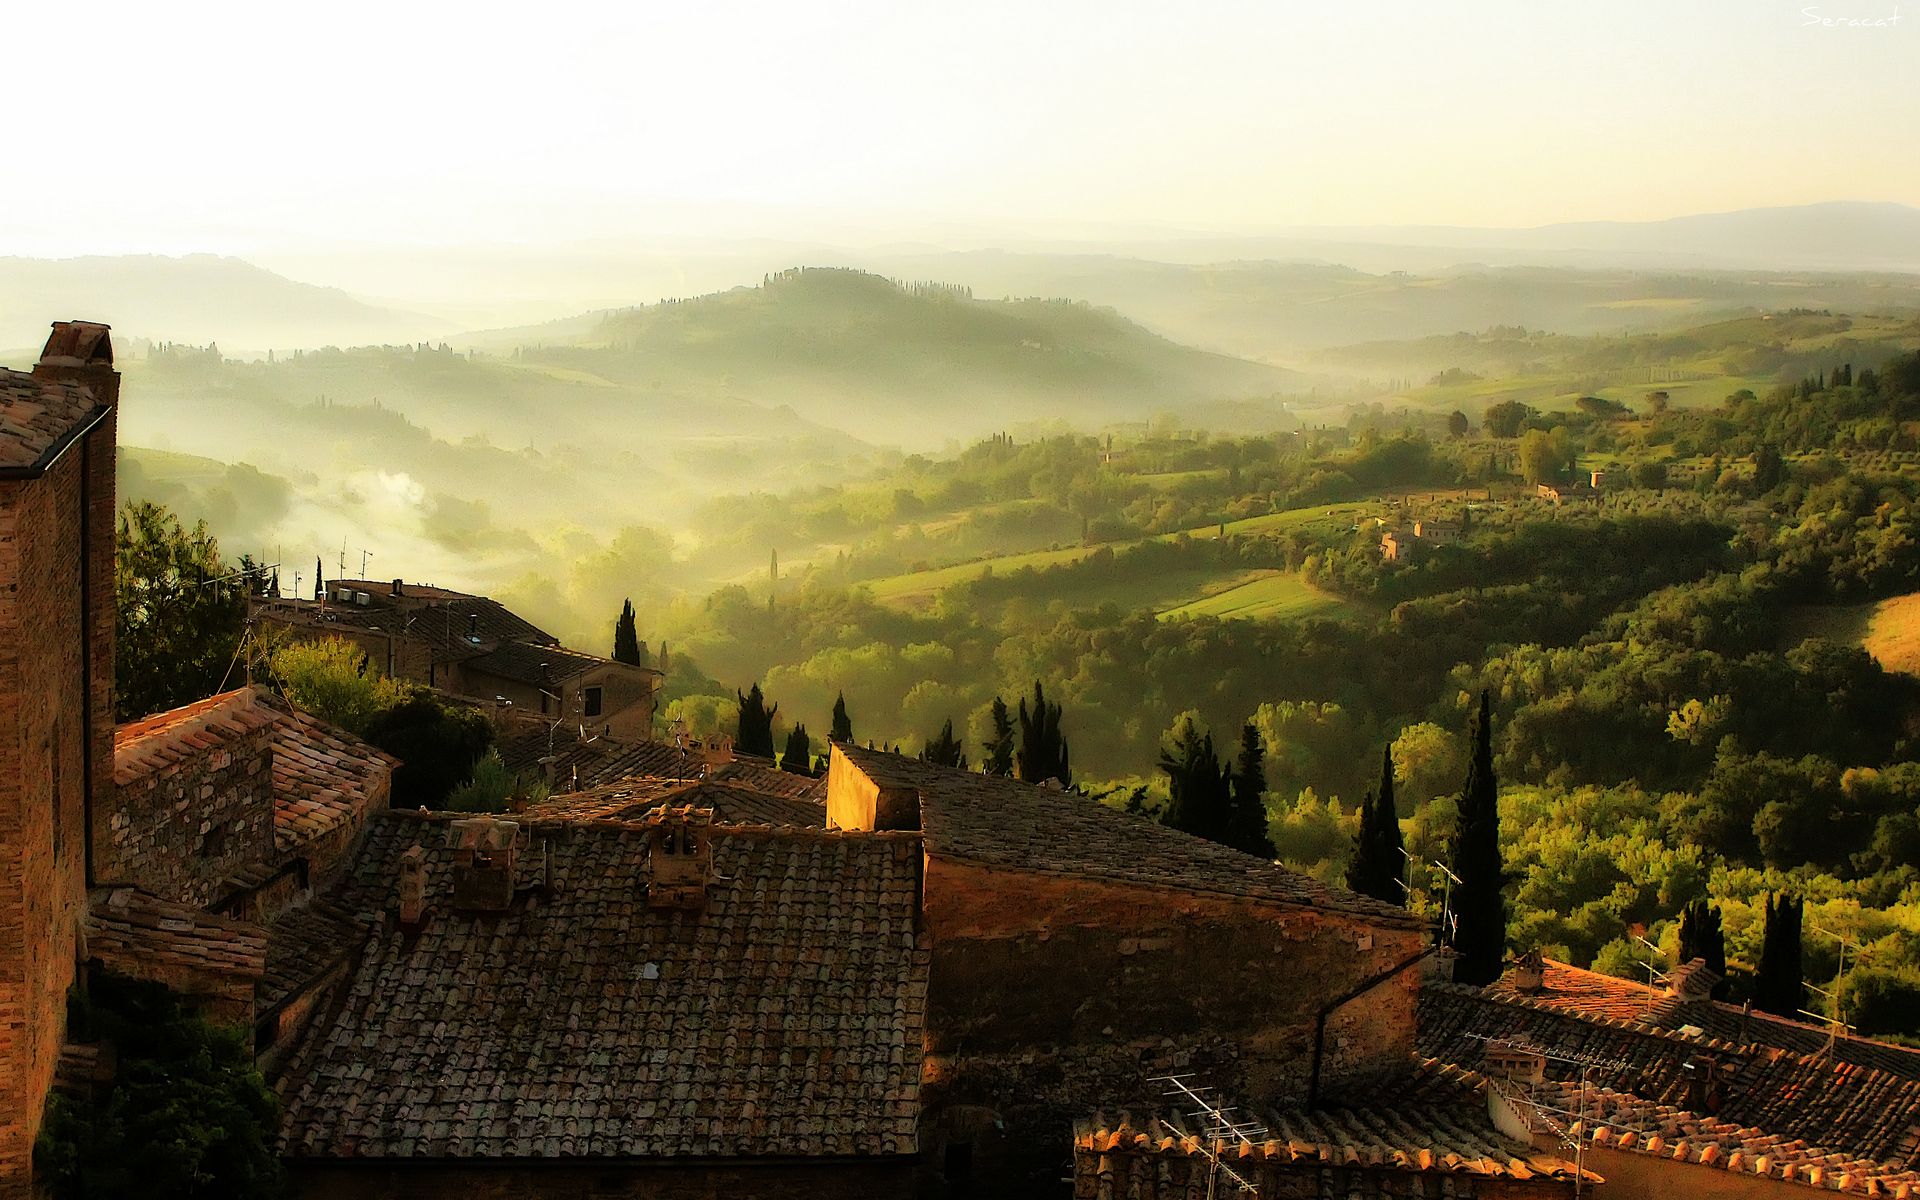 View of Tuscan Landscape from Roof HD Wallpaper